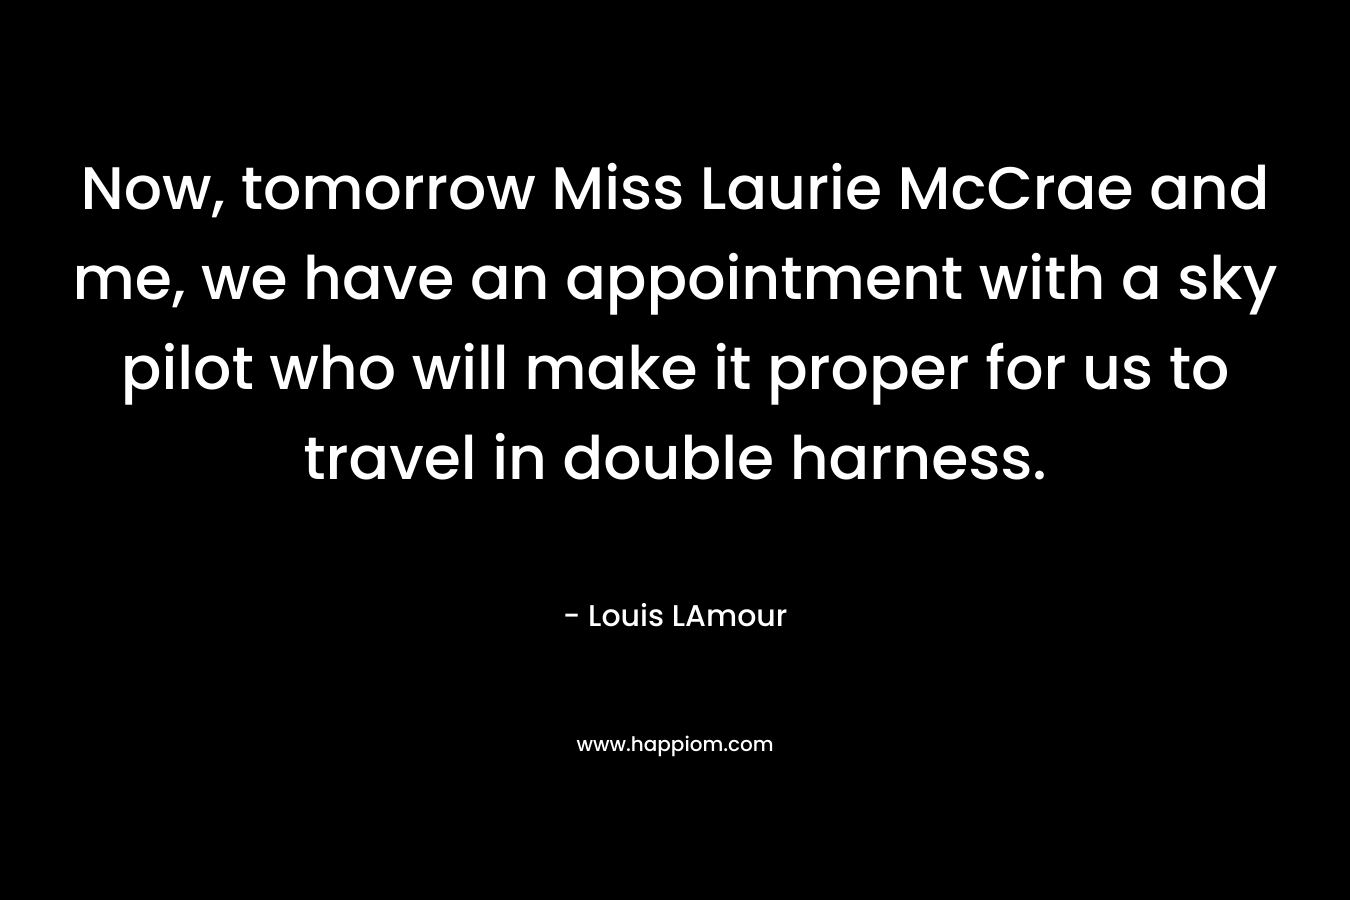 Now, tomorrow Miss Laurie McCrae and me, we have an appointment with a sky pilot who will make it proper for us to travel in double harness.